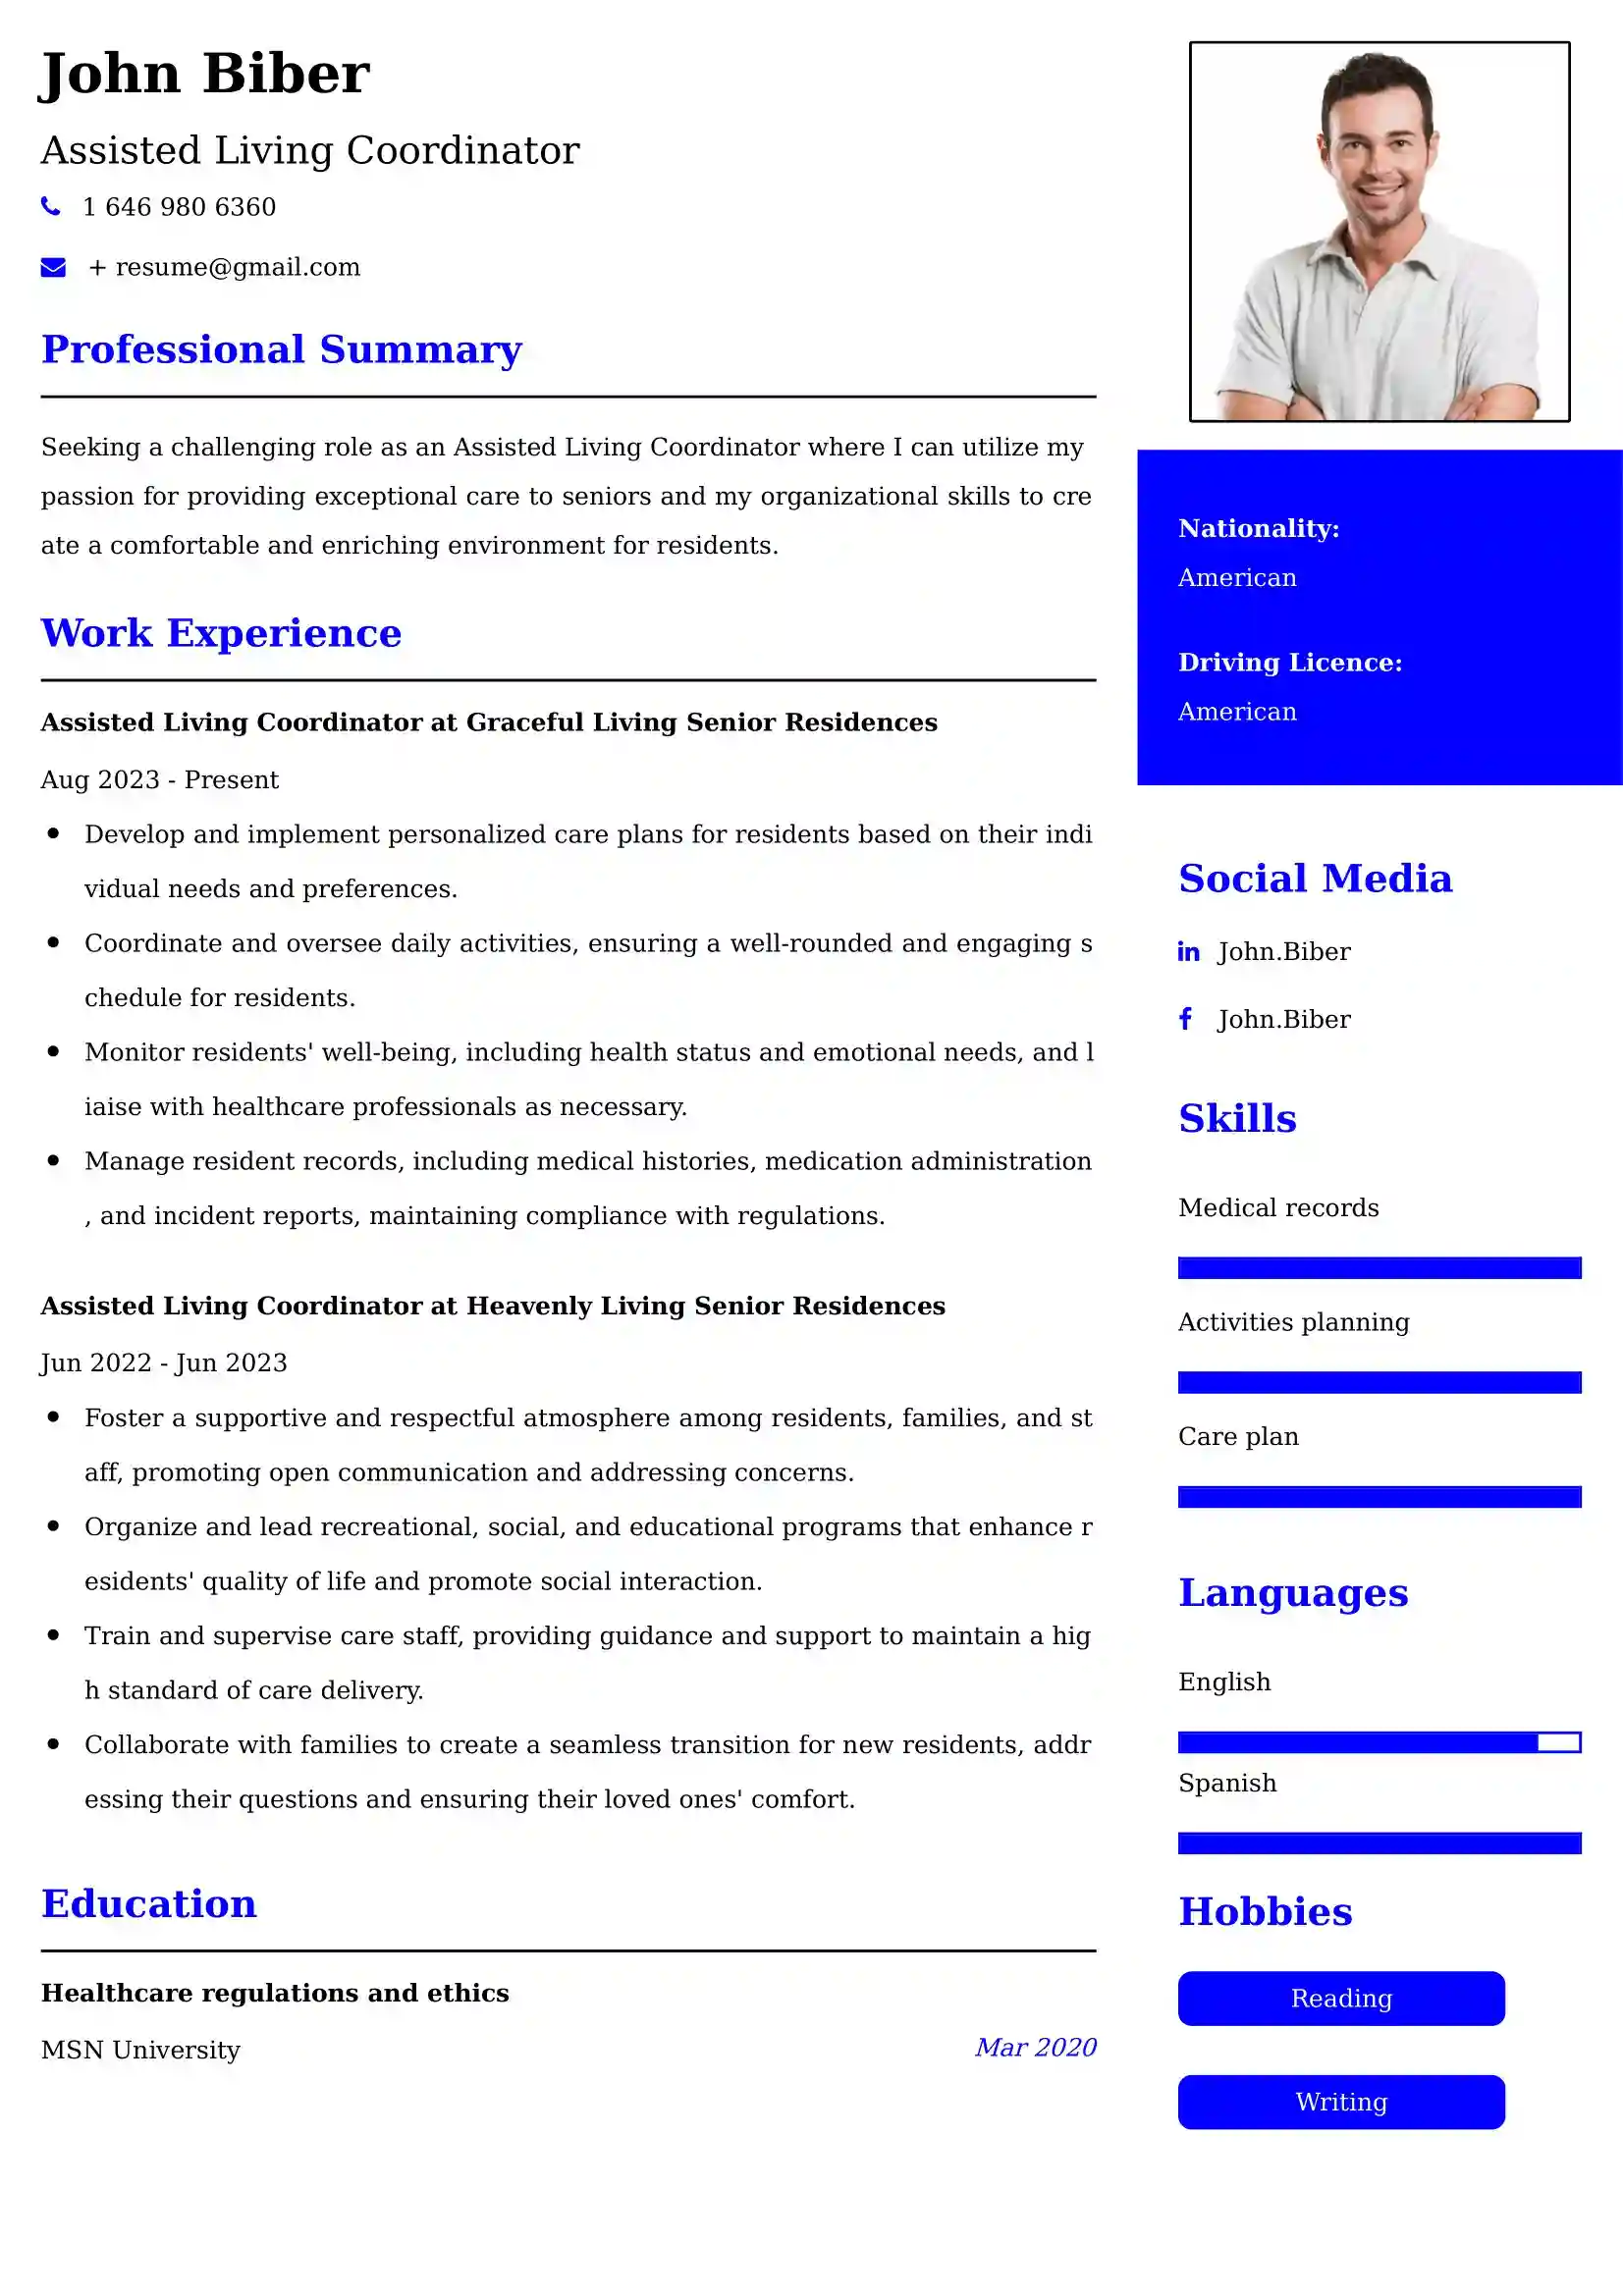 Assisted Living Coordinator Resume Examples - UAE Format and Tips.